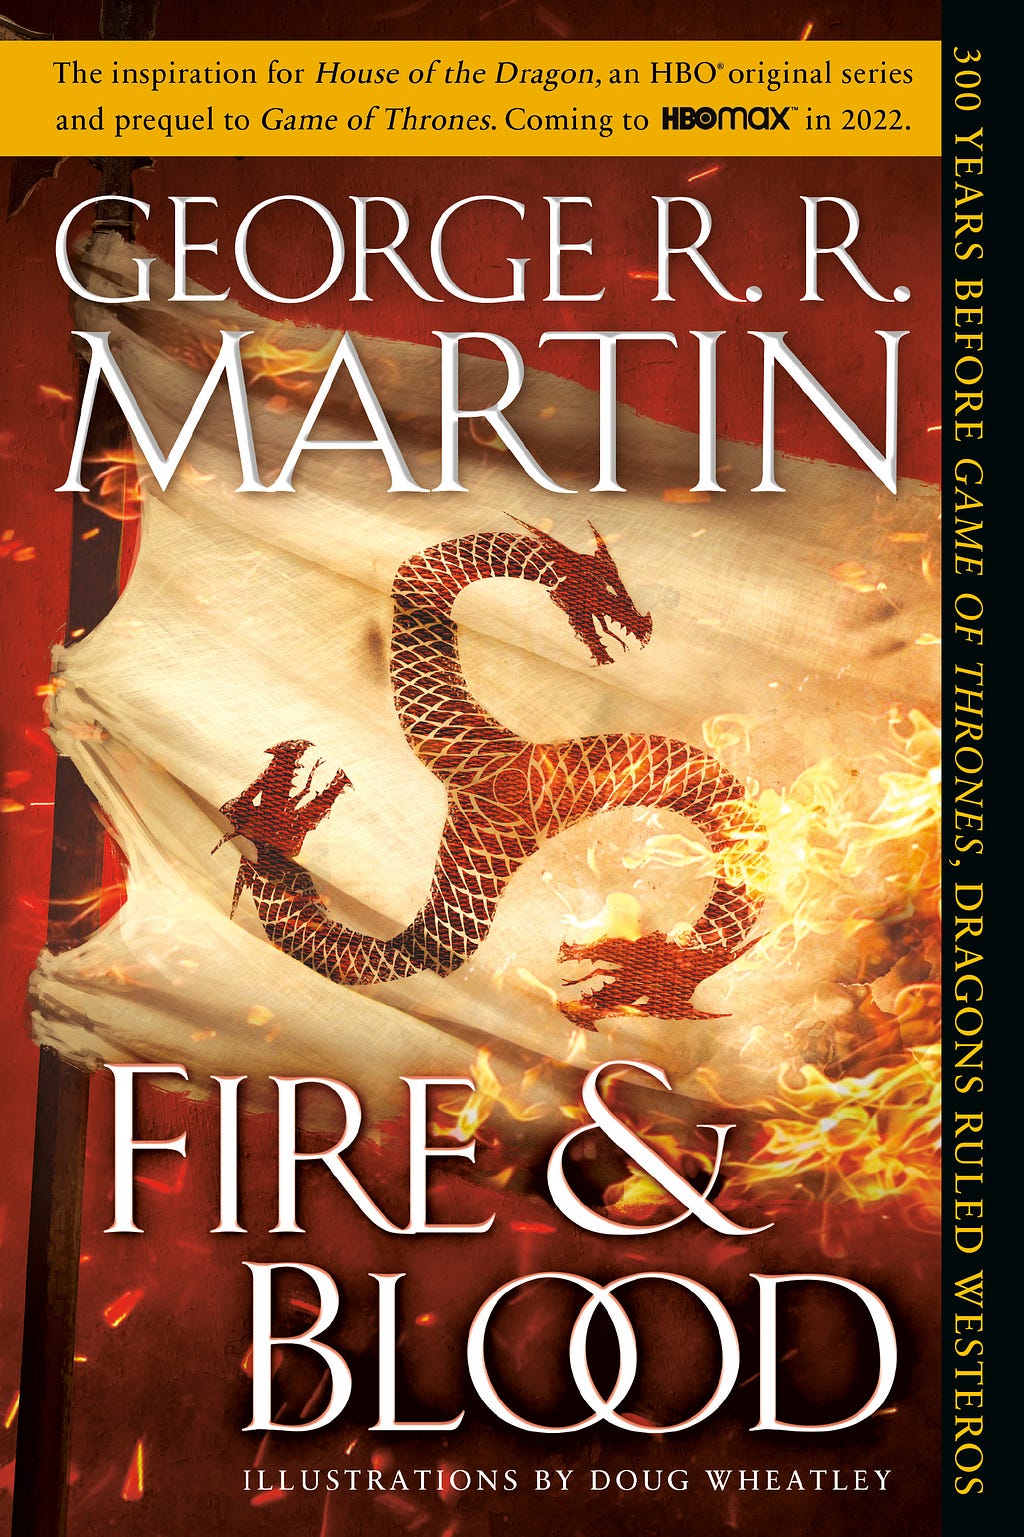 Fire & Blood: 300 Years Before A Game of Thrones (The Targaryen Dynasty: The House of the Dragon) PDF